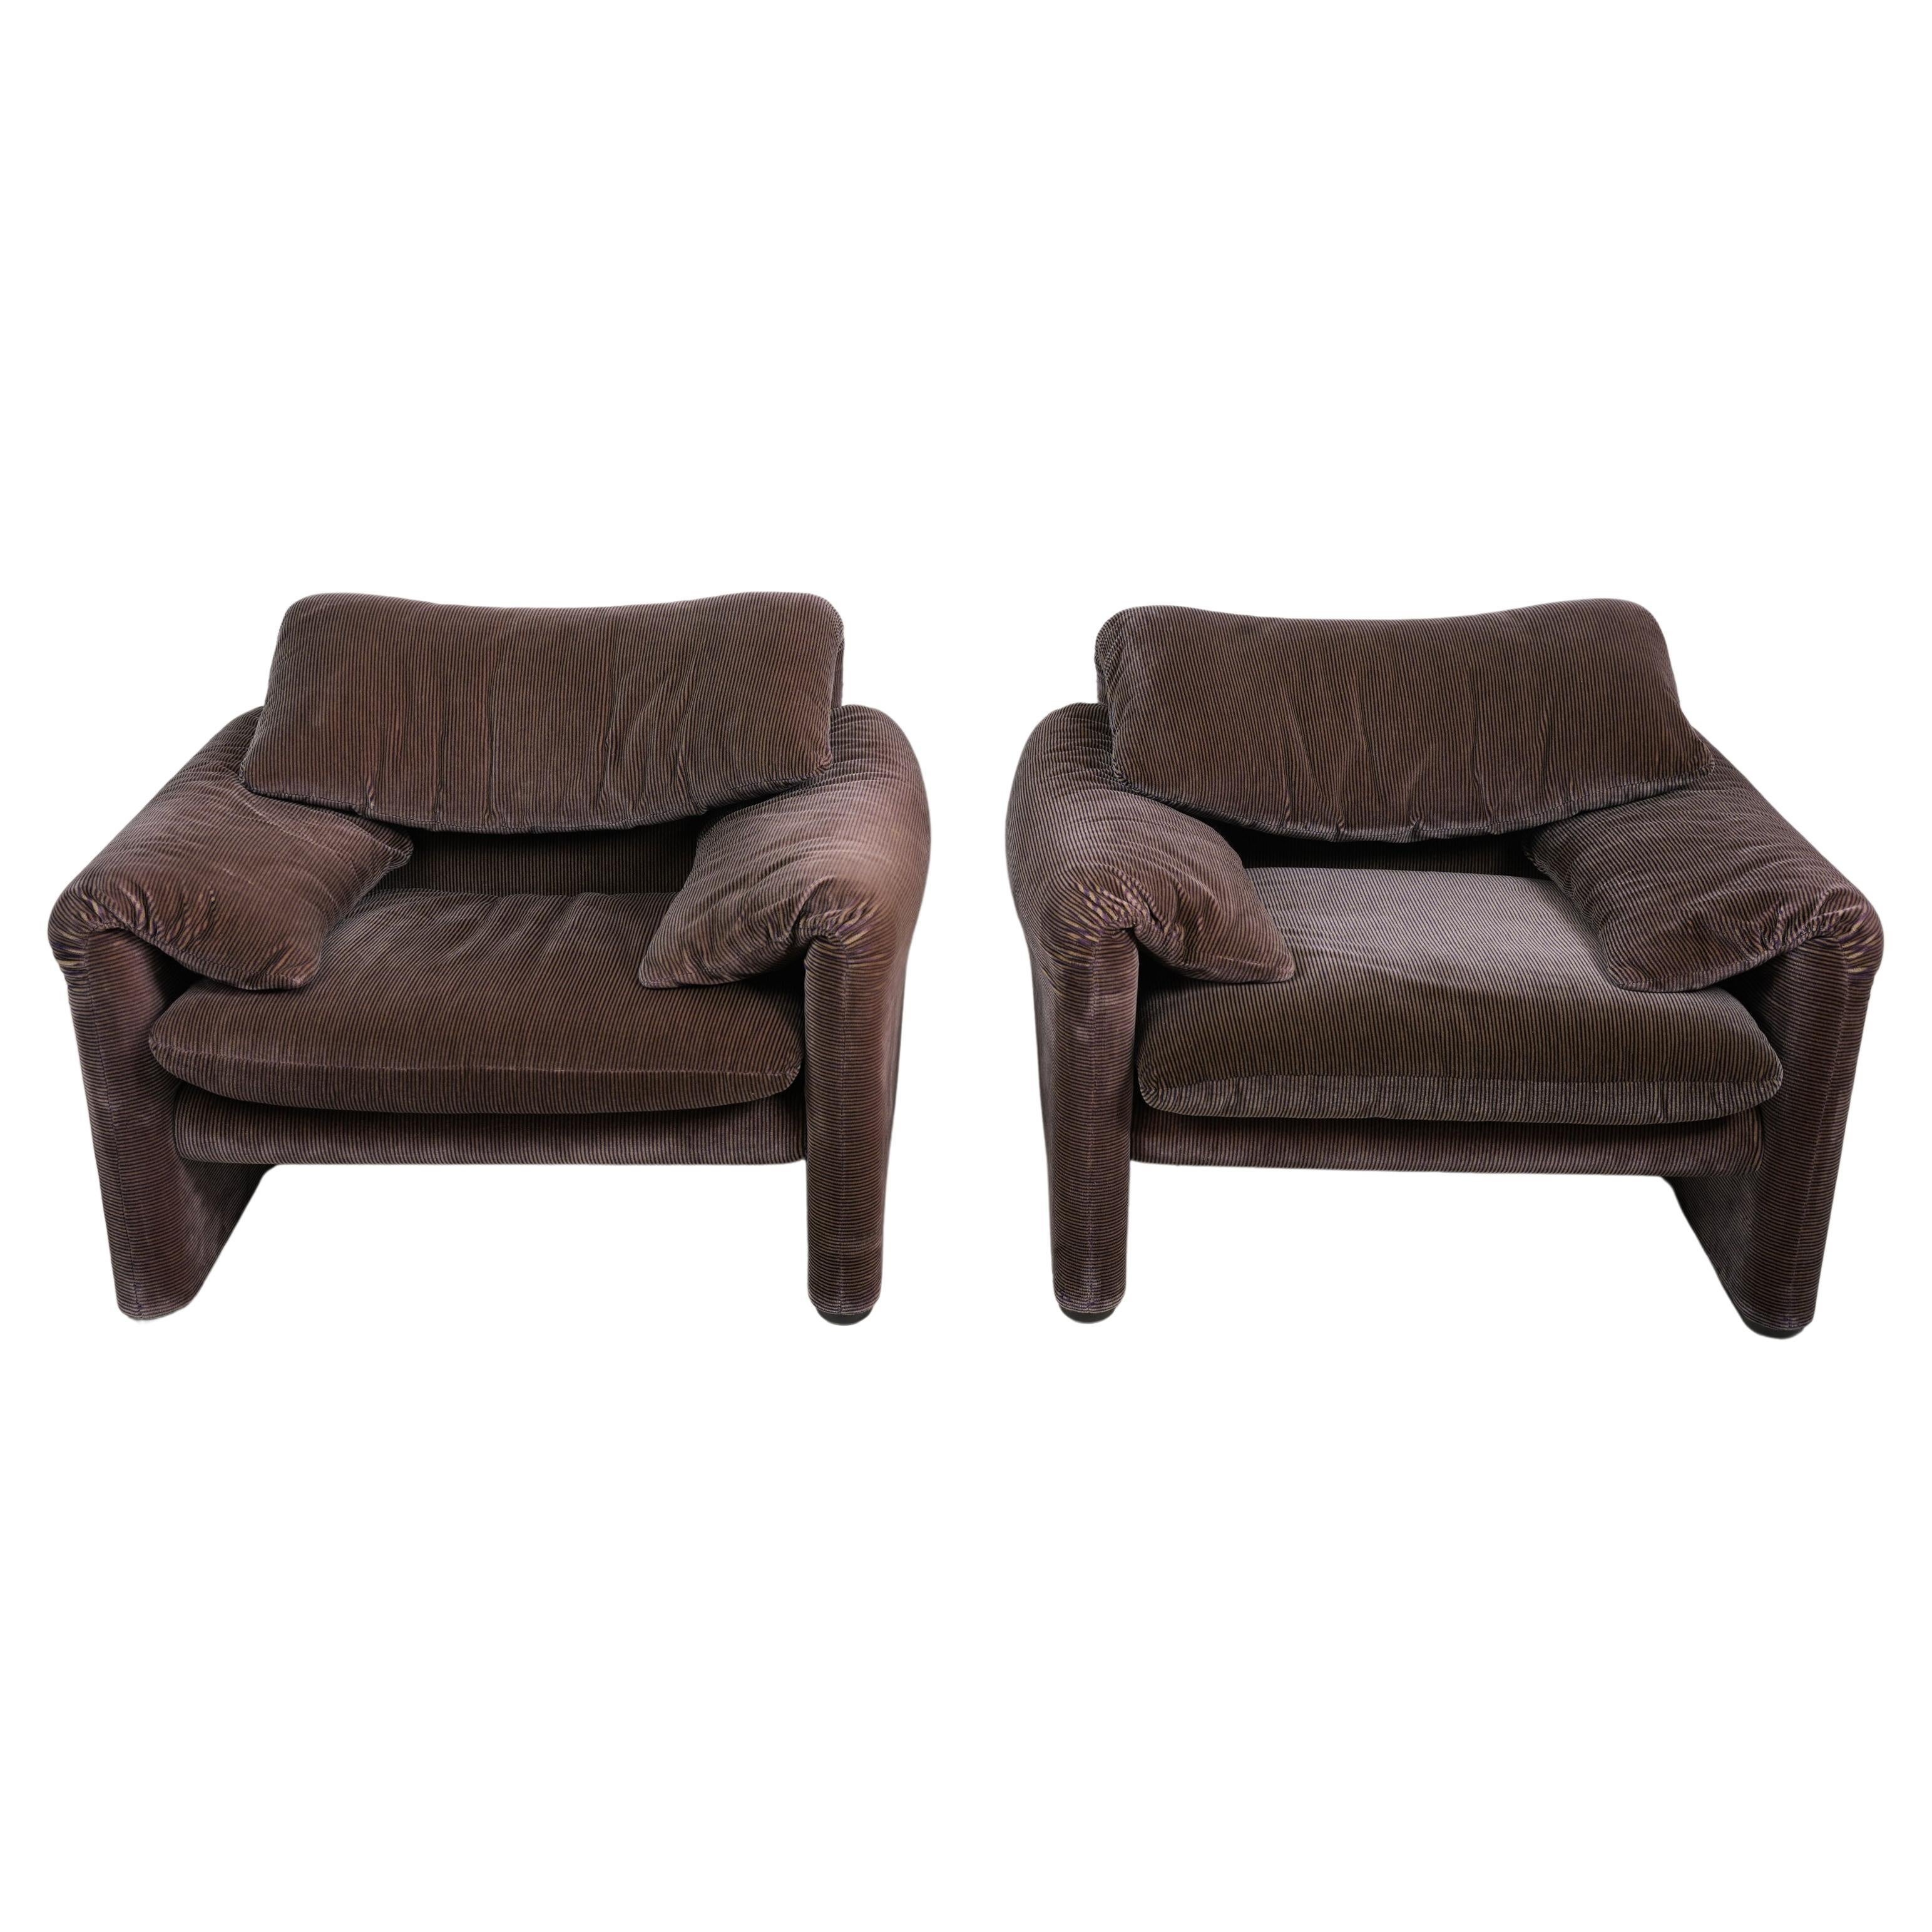 Set of Two Maralunga Longue Chair By Vico Magistretti for Cassina 1970s For Sale